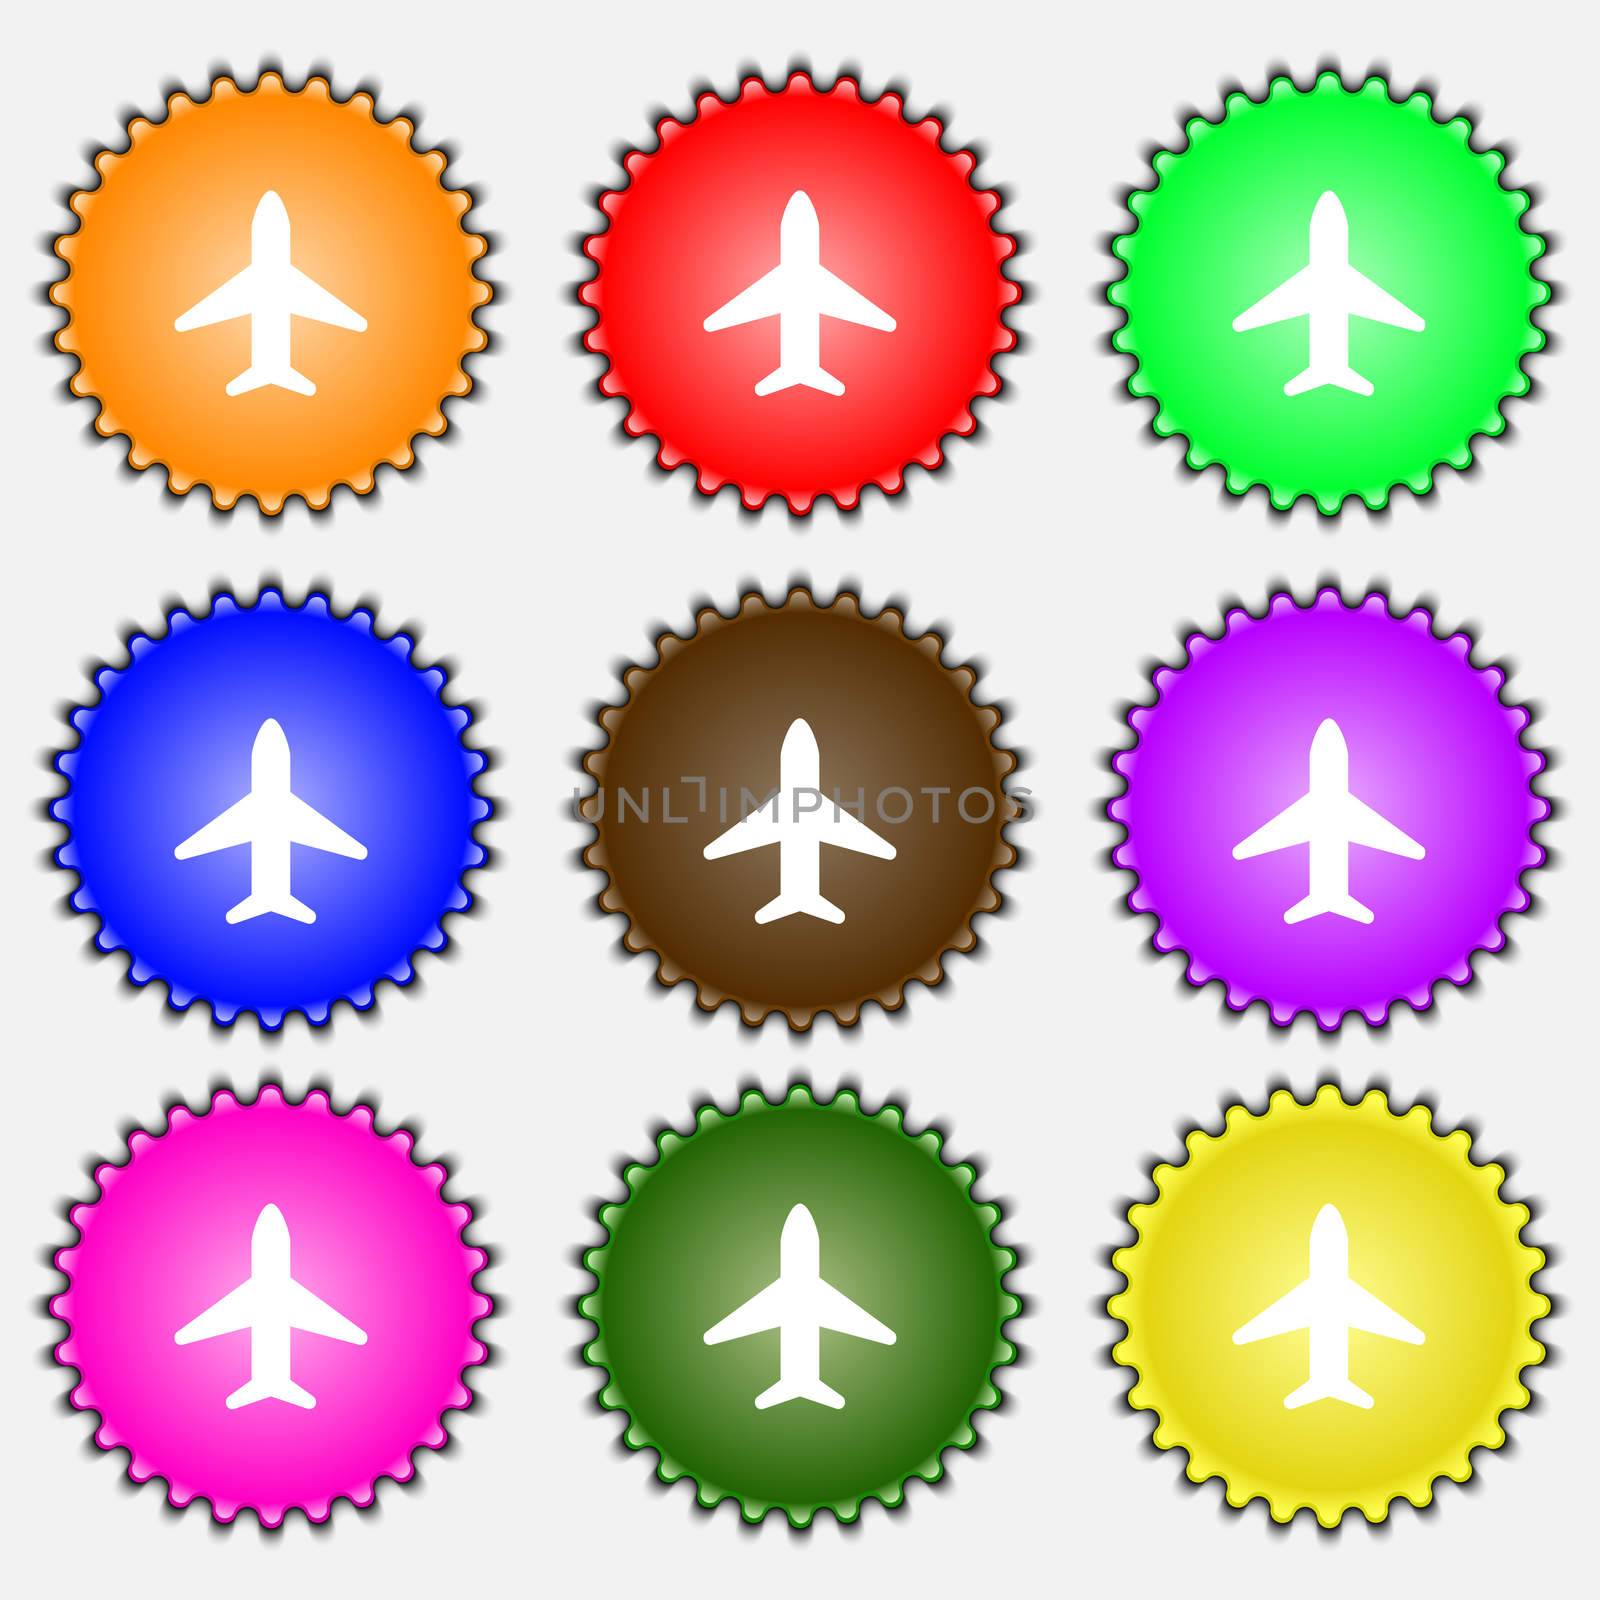 Airplane, Plane, Travel, Flight icon sign. A set of nine different colored labels. illustration 